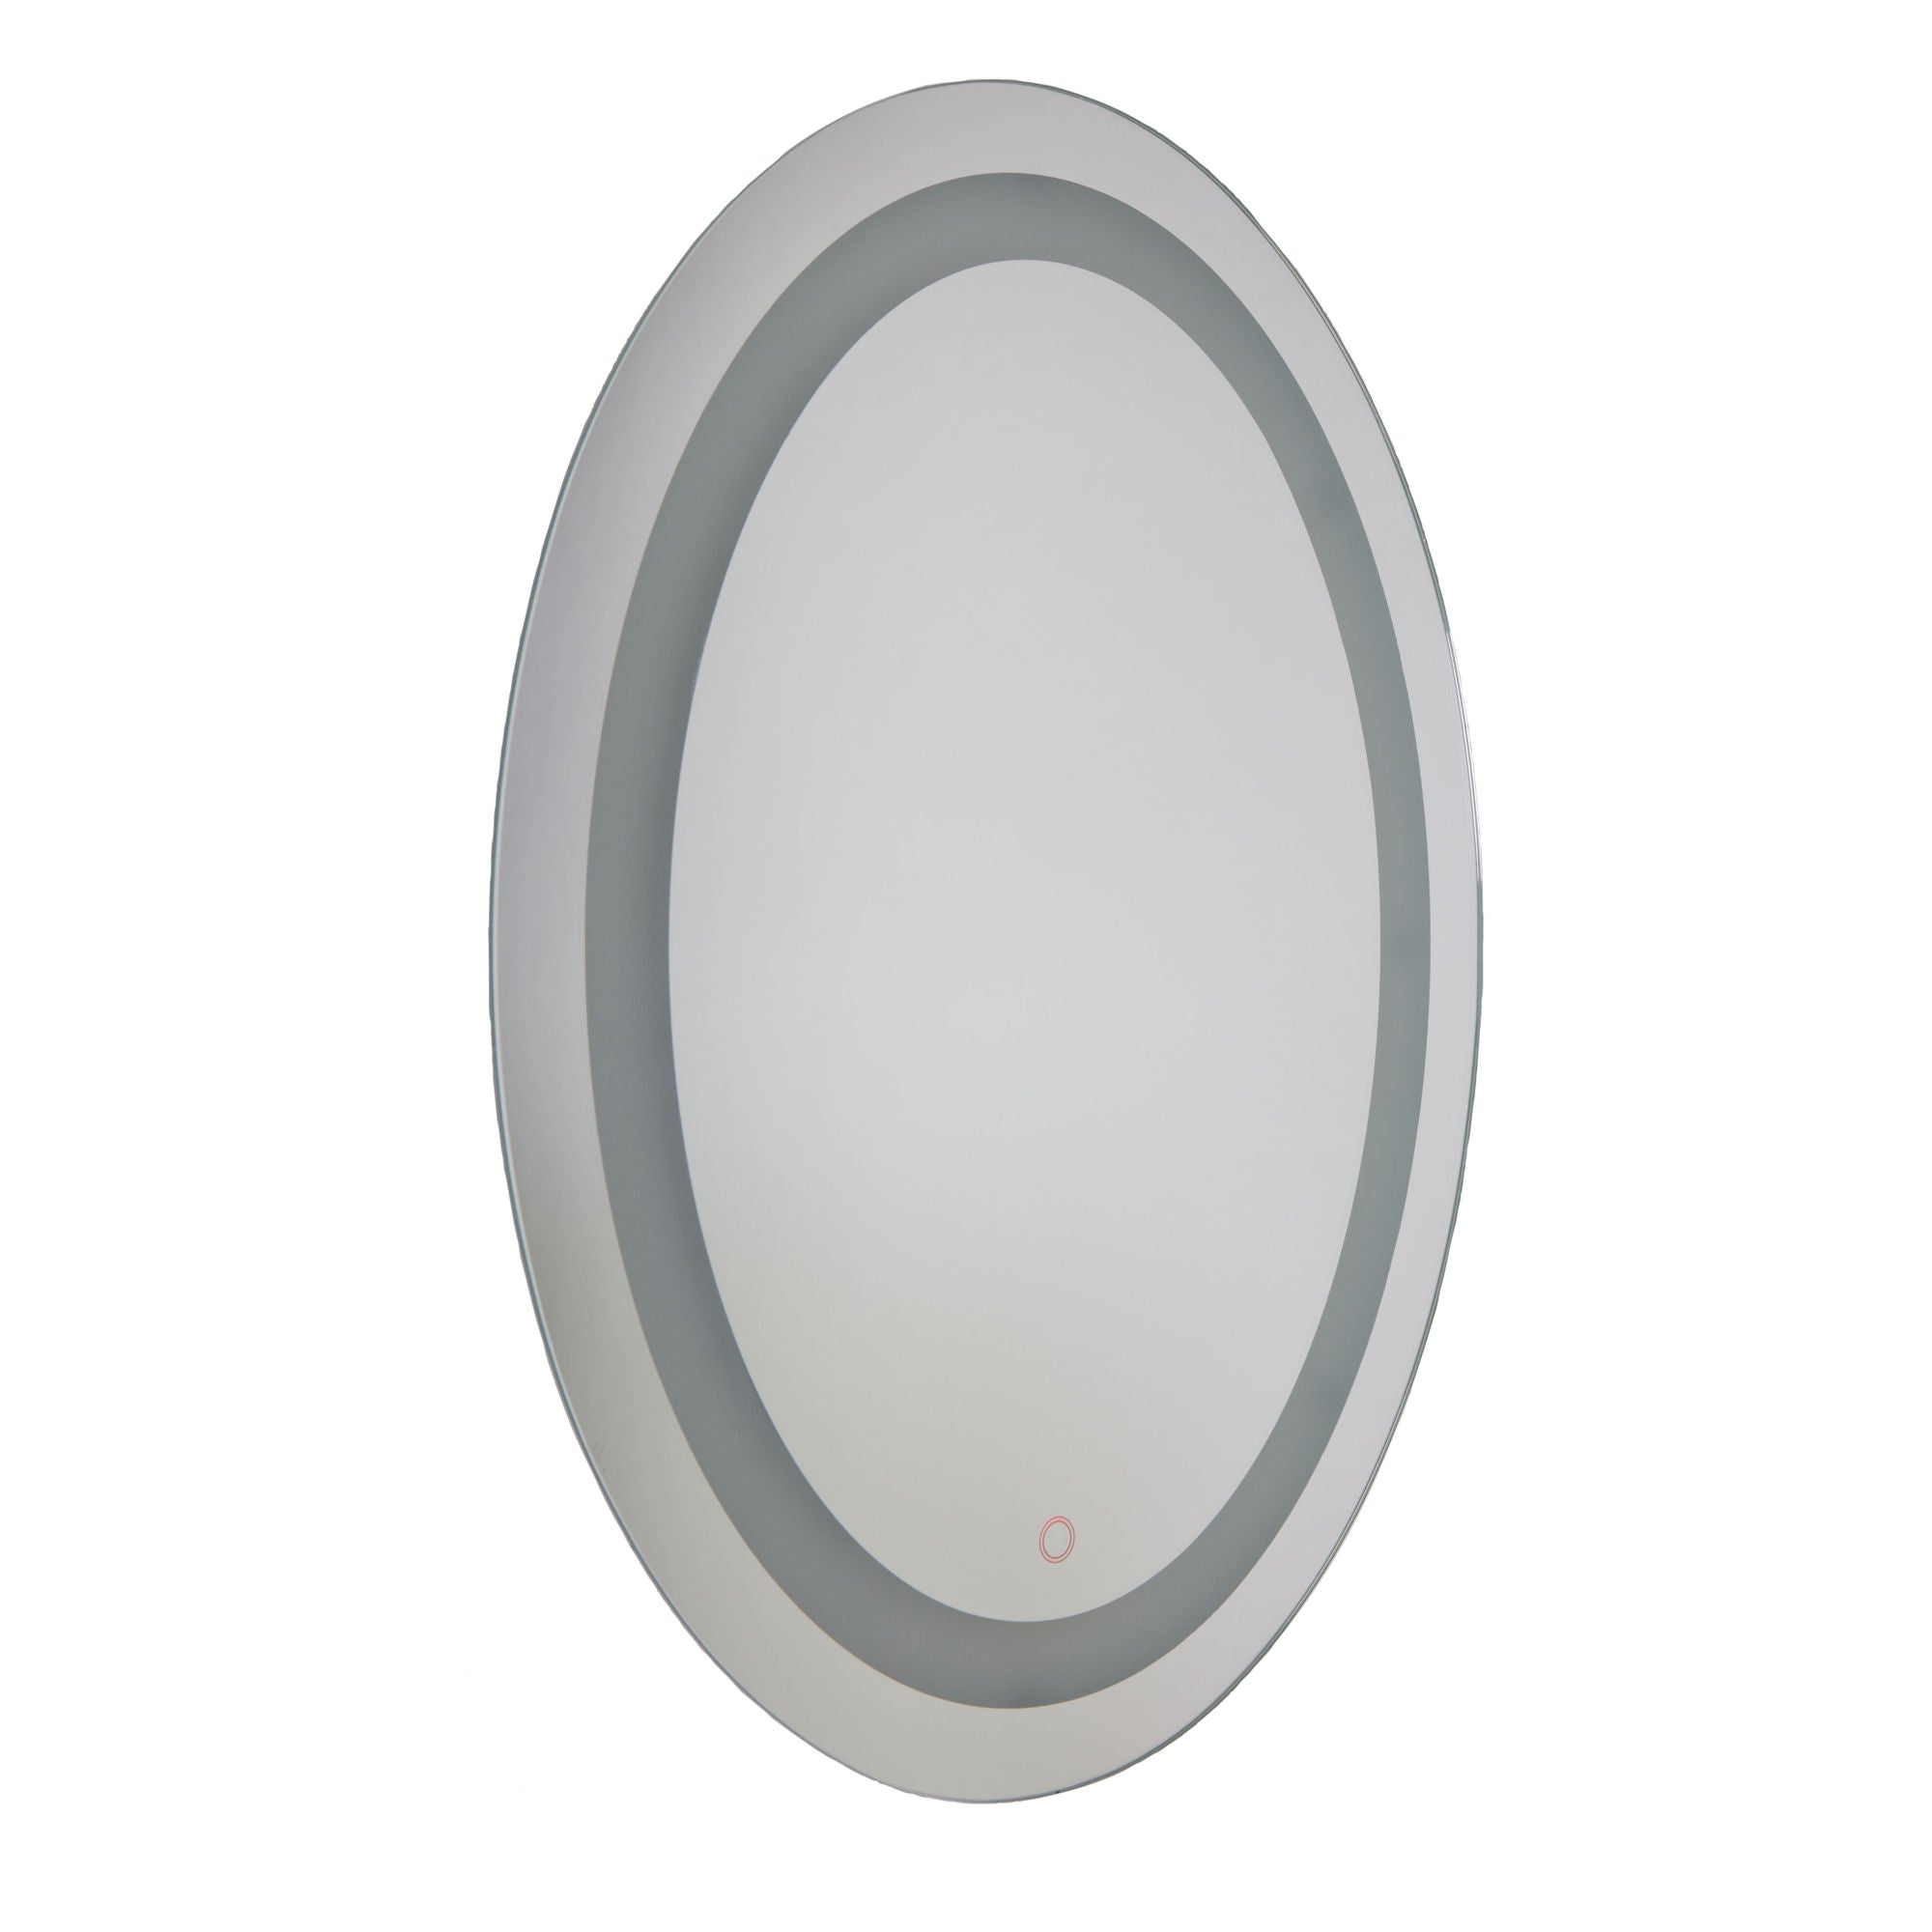 Reflections Mirror INTEGRATED LED - AM303 | ARTCRAFT